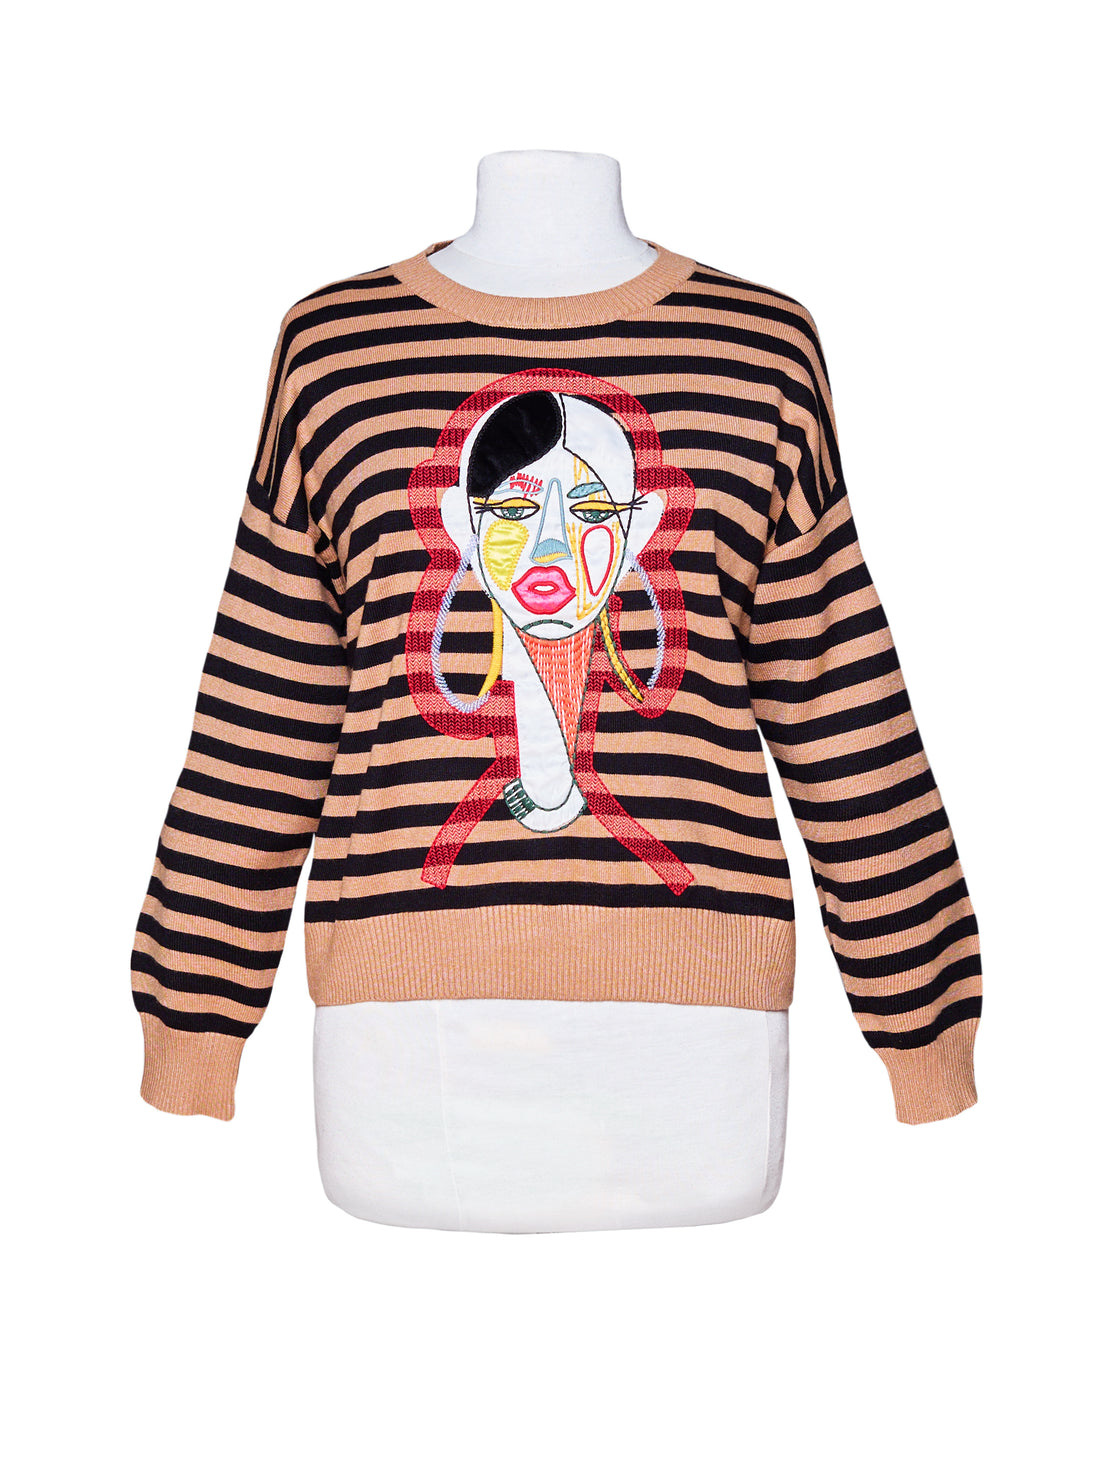 EMBROIDERED FACE SWEATER